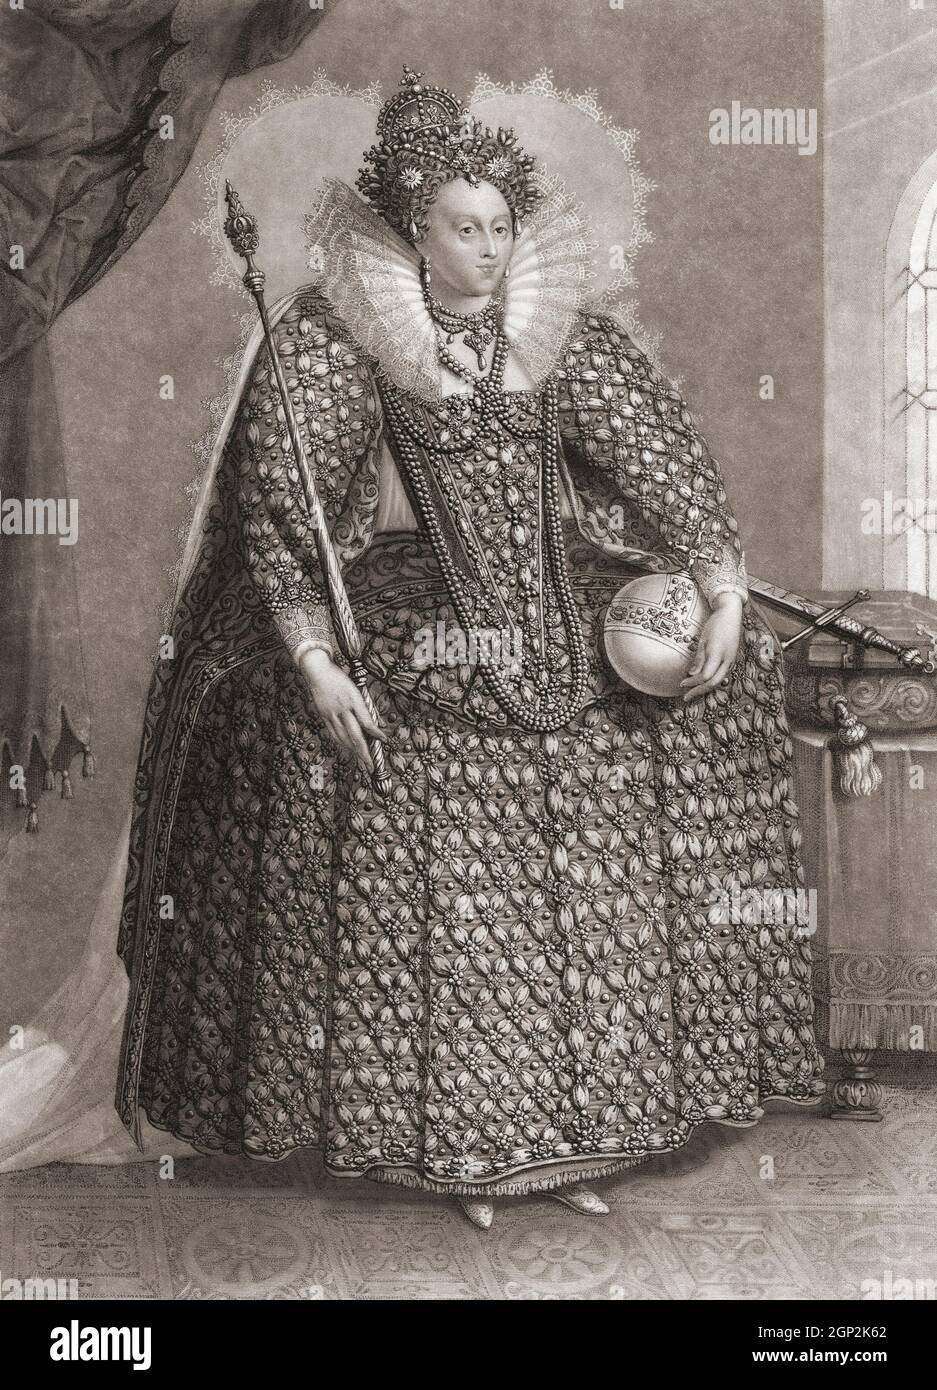 Elizabeth I, 1533 - 1603, Queen of England and Ireland.  After an engraving by Charles Turner published in 1840 with the following caption:  Her Sacred Majesty Queen Elizabeth, in the superb dress in which she went to St. Paul's to return thanks for the defeat of the Spanish Armada. Stock Photo